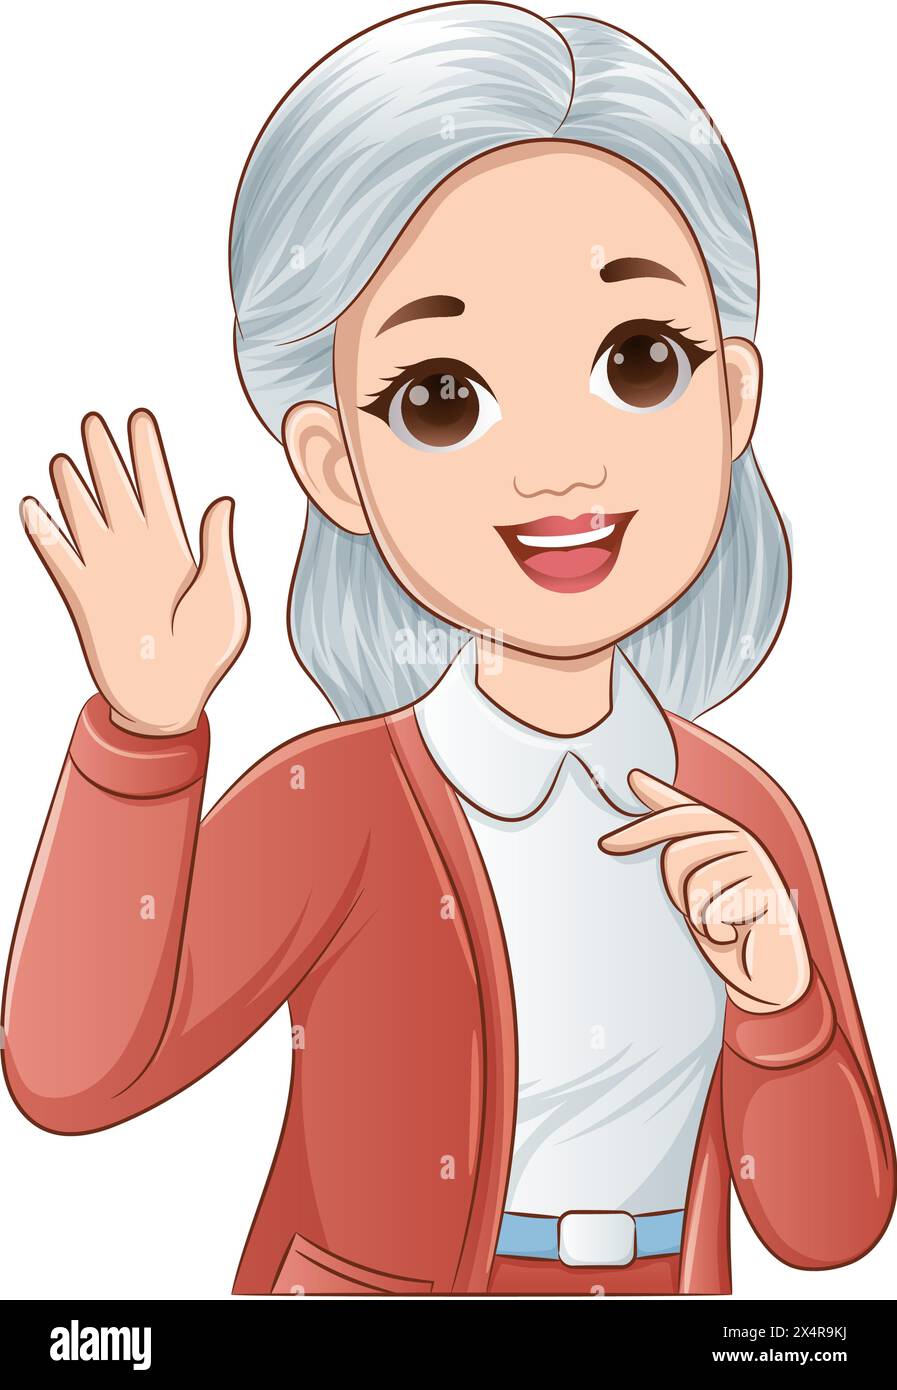 Middle-aged woman, smiling kindly while waving vector illustration Stock Vector